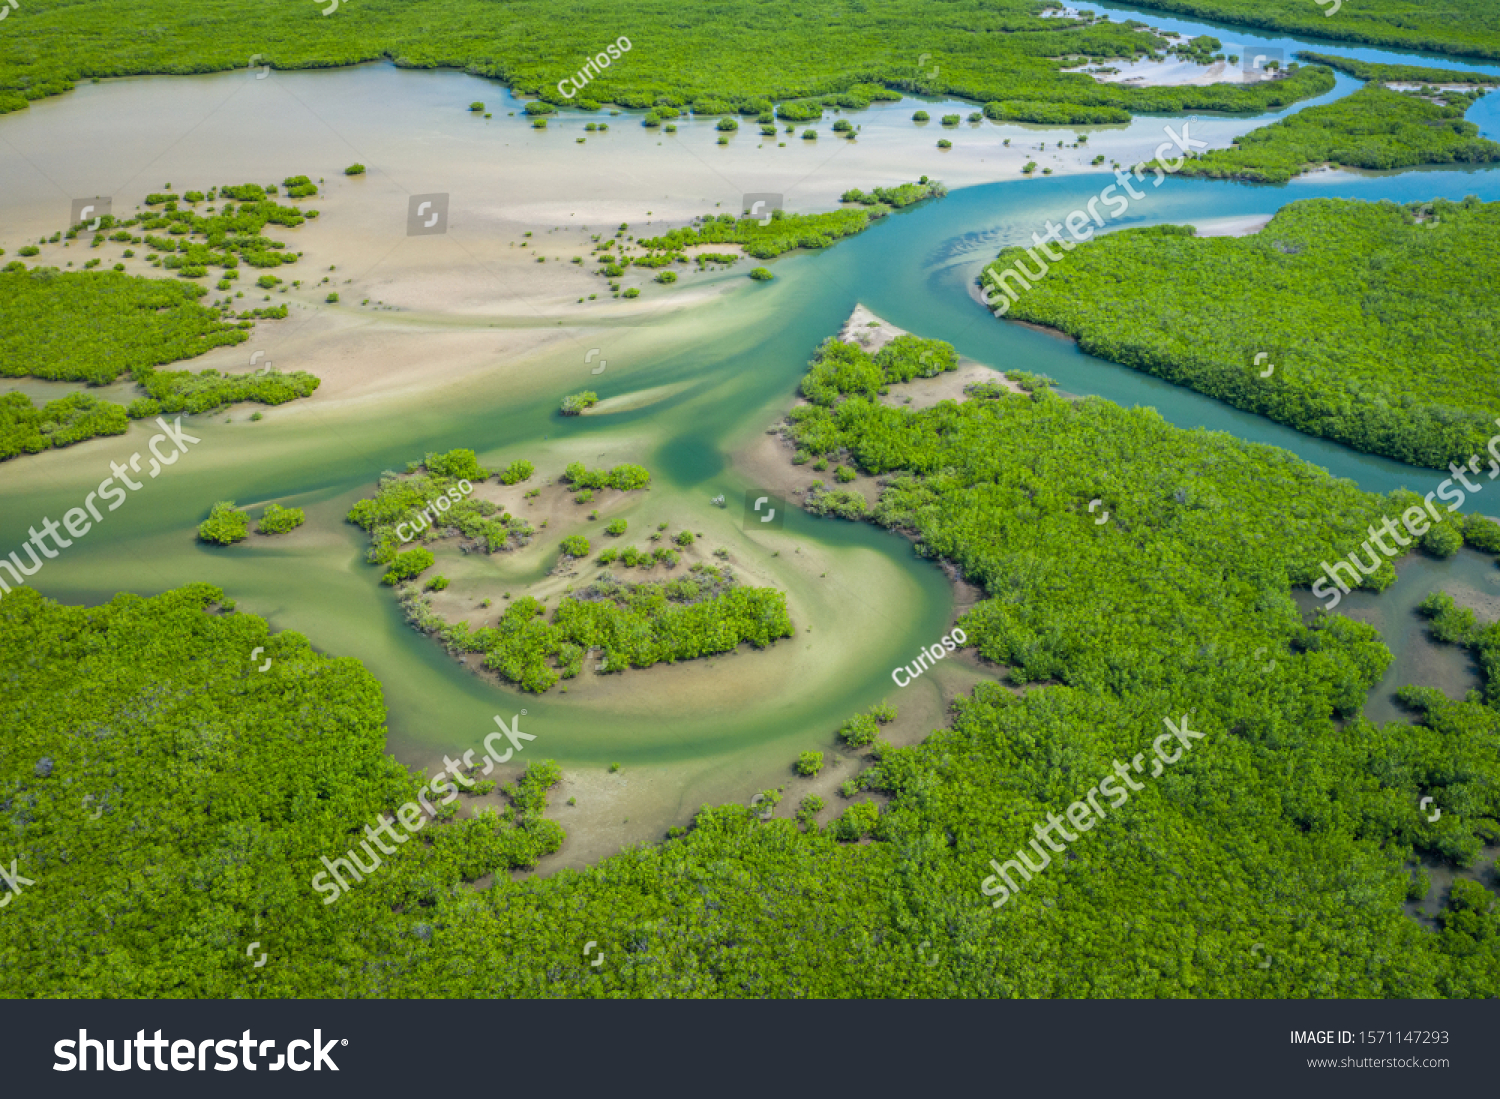 Senegal Mangroves. Aerial view of mangrove forest in the  Saloum Delta National Park, Joal Fadiout, Senegal. Photo made by drone from above. Africa Natural Landscape. #1571147293